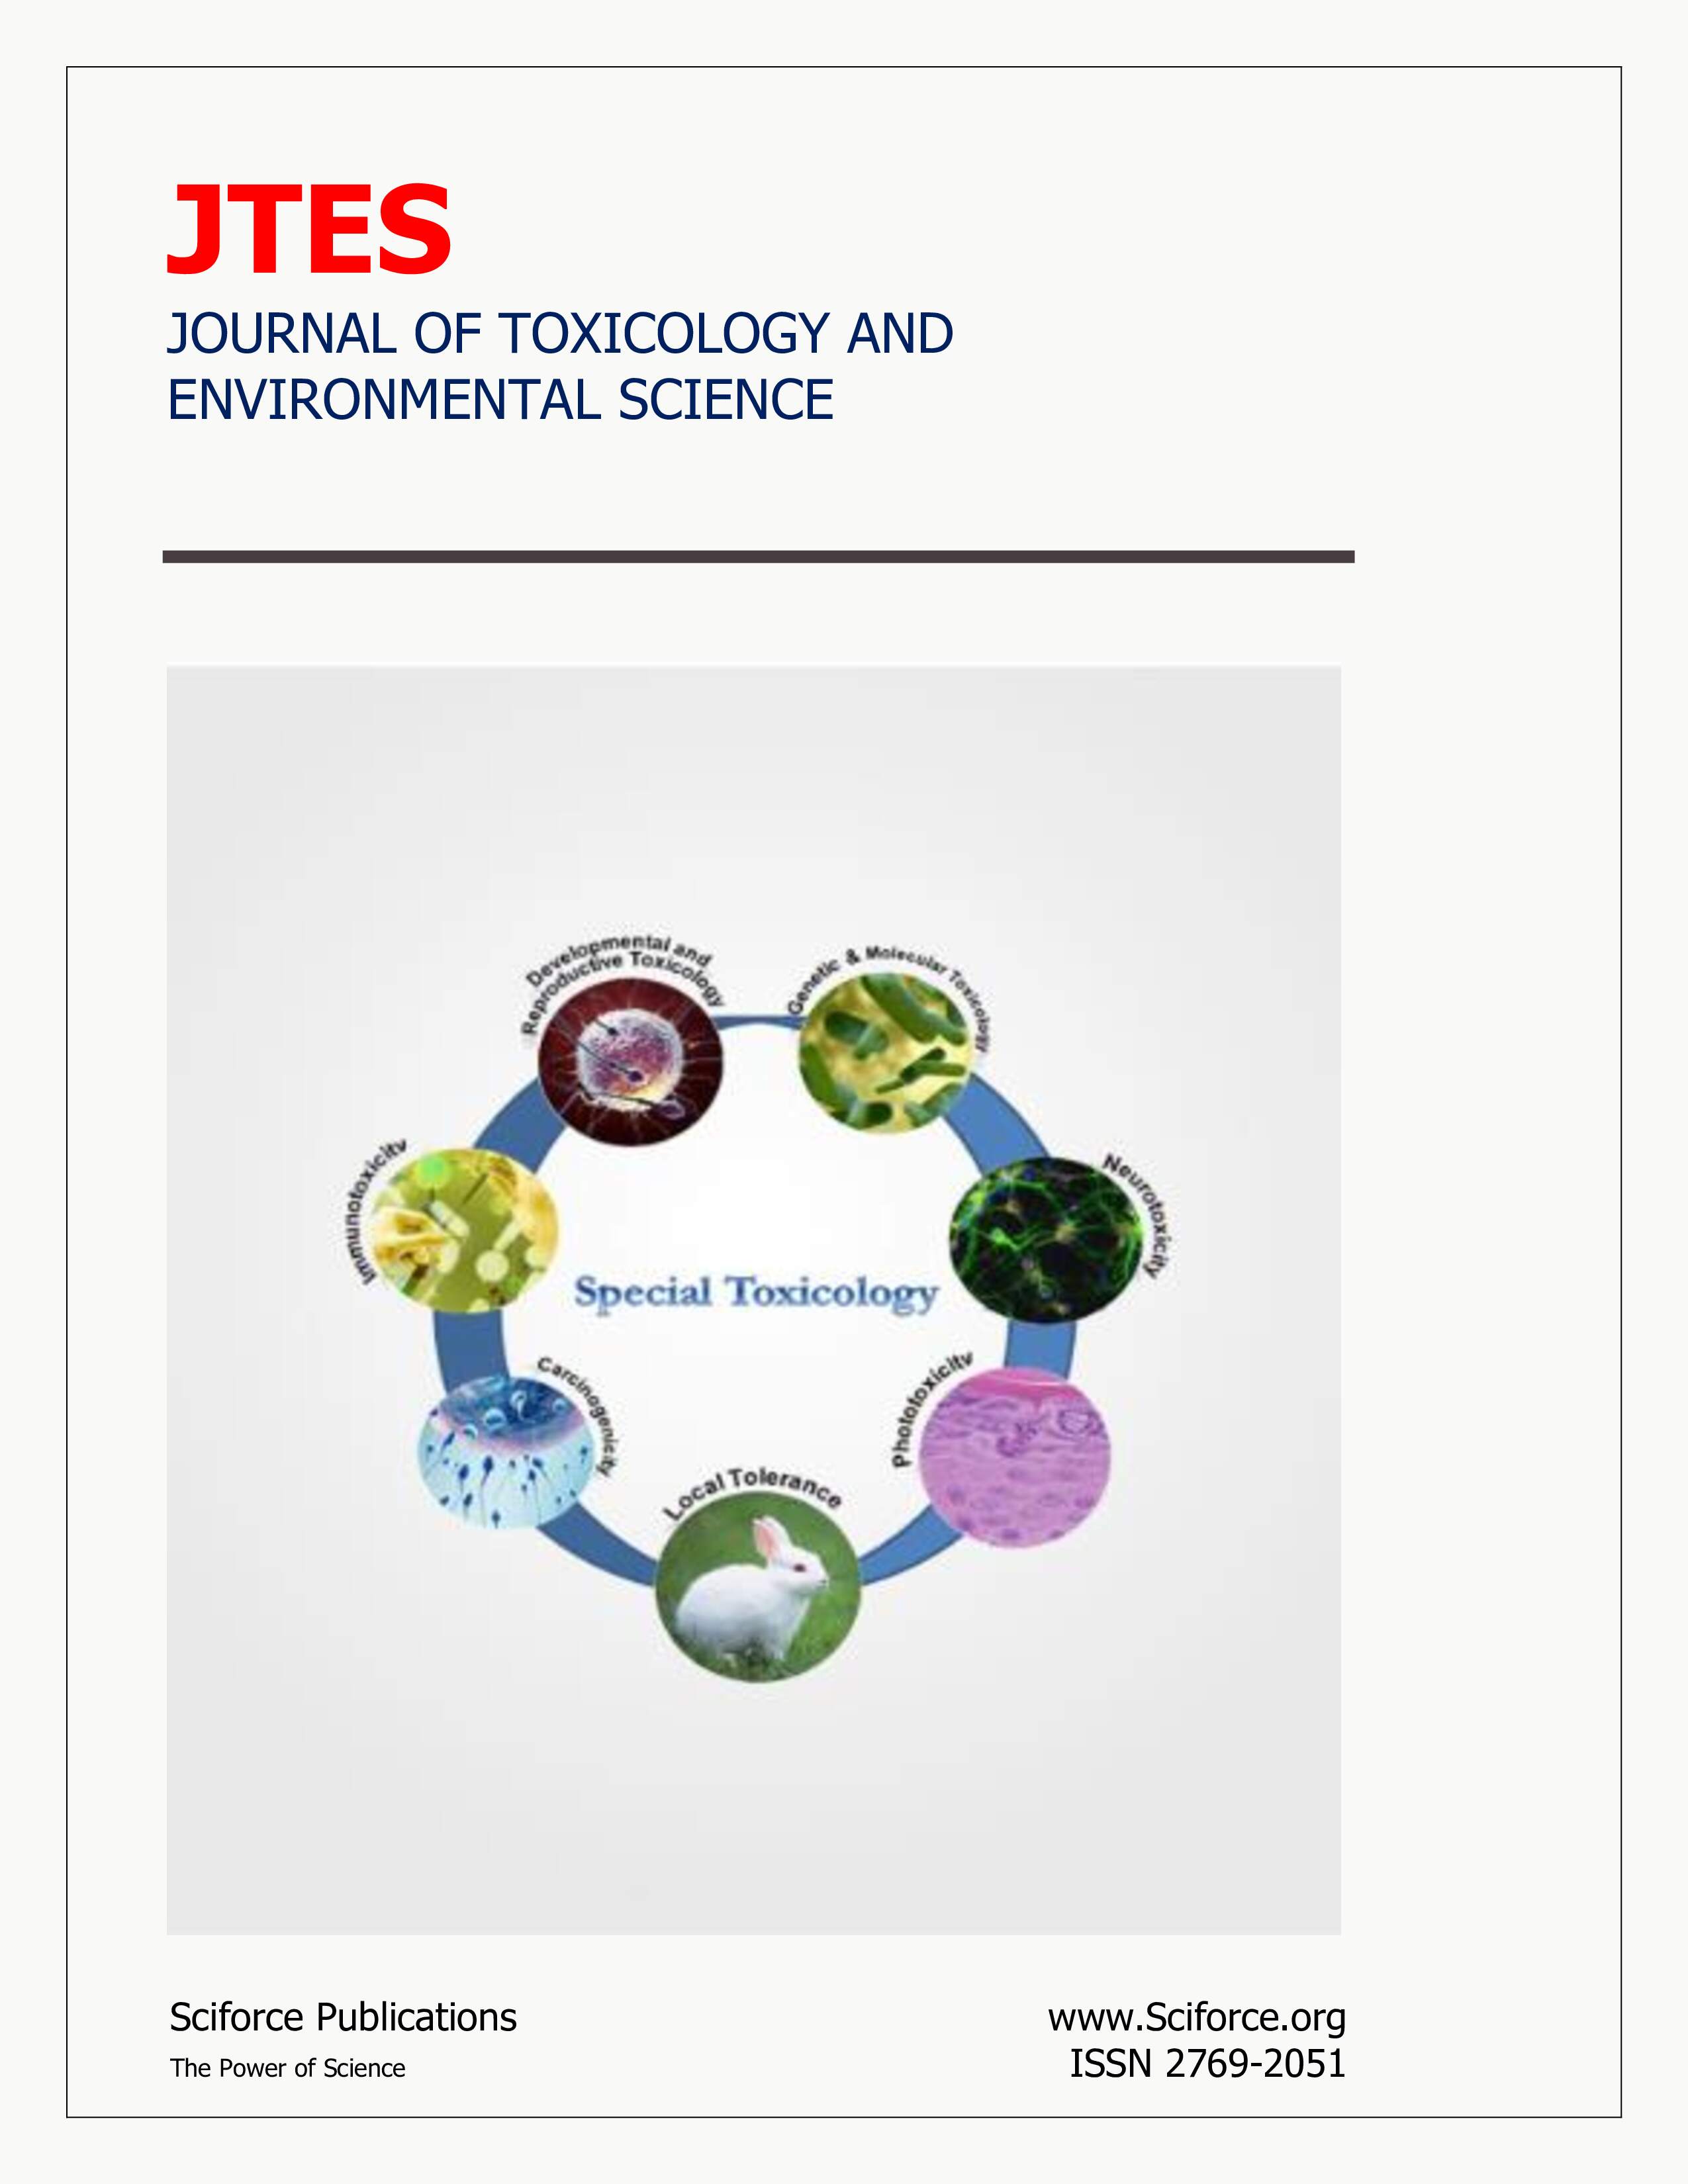 Journal of Toxicology and Environmental Science